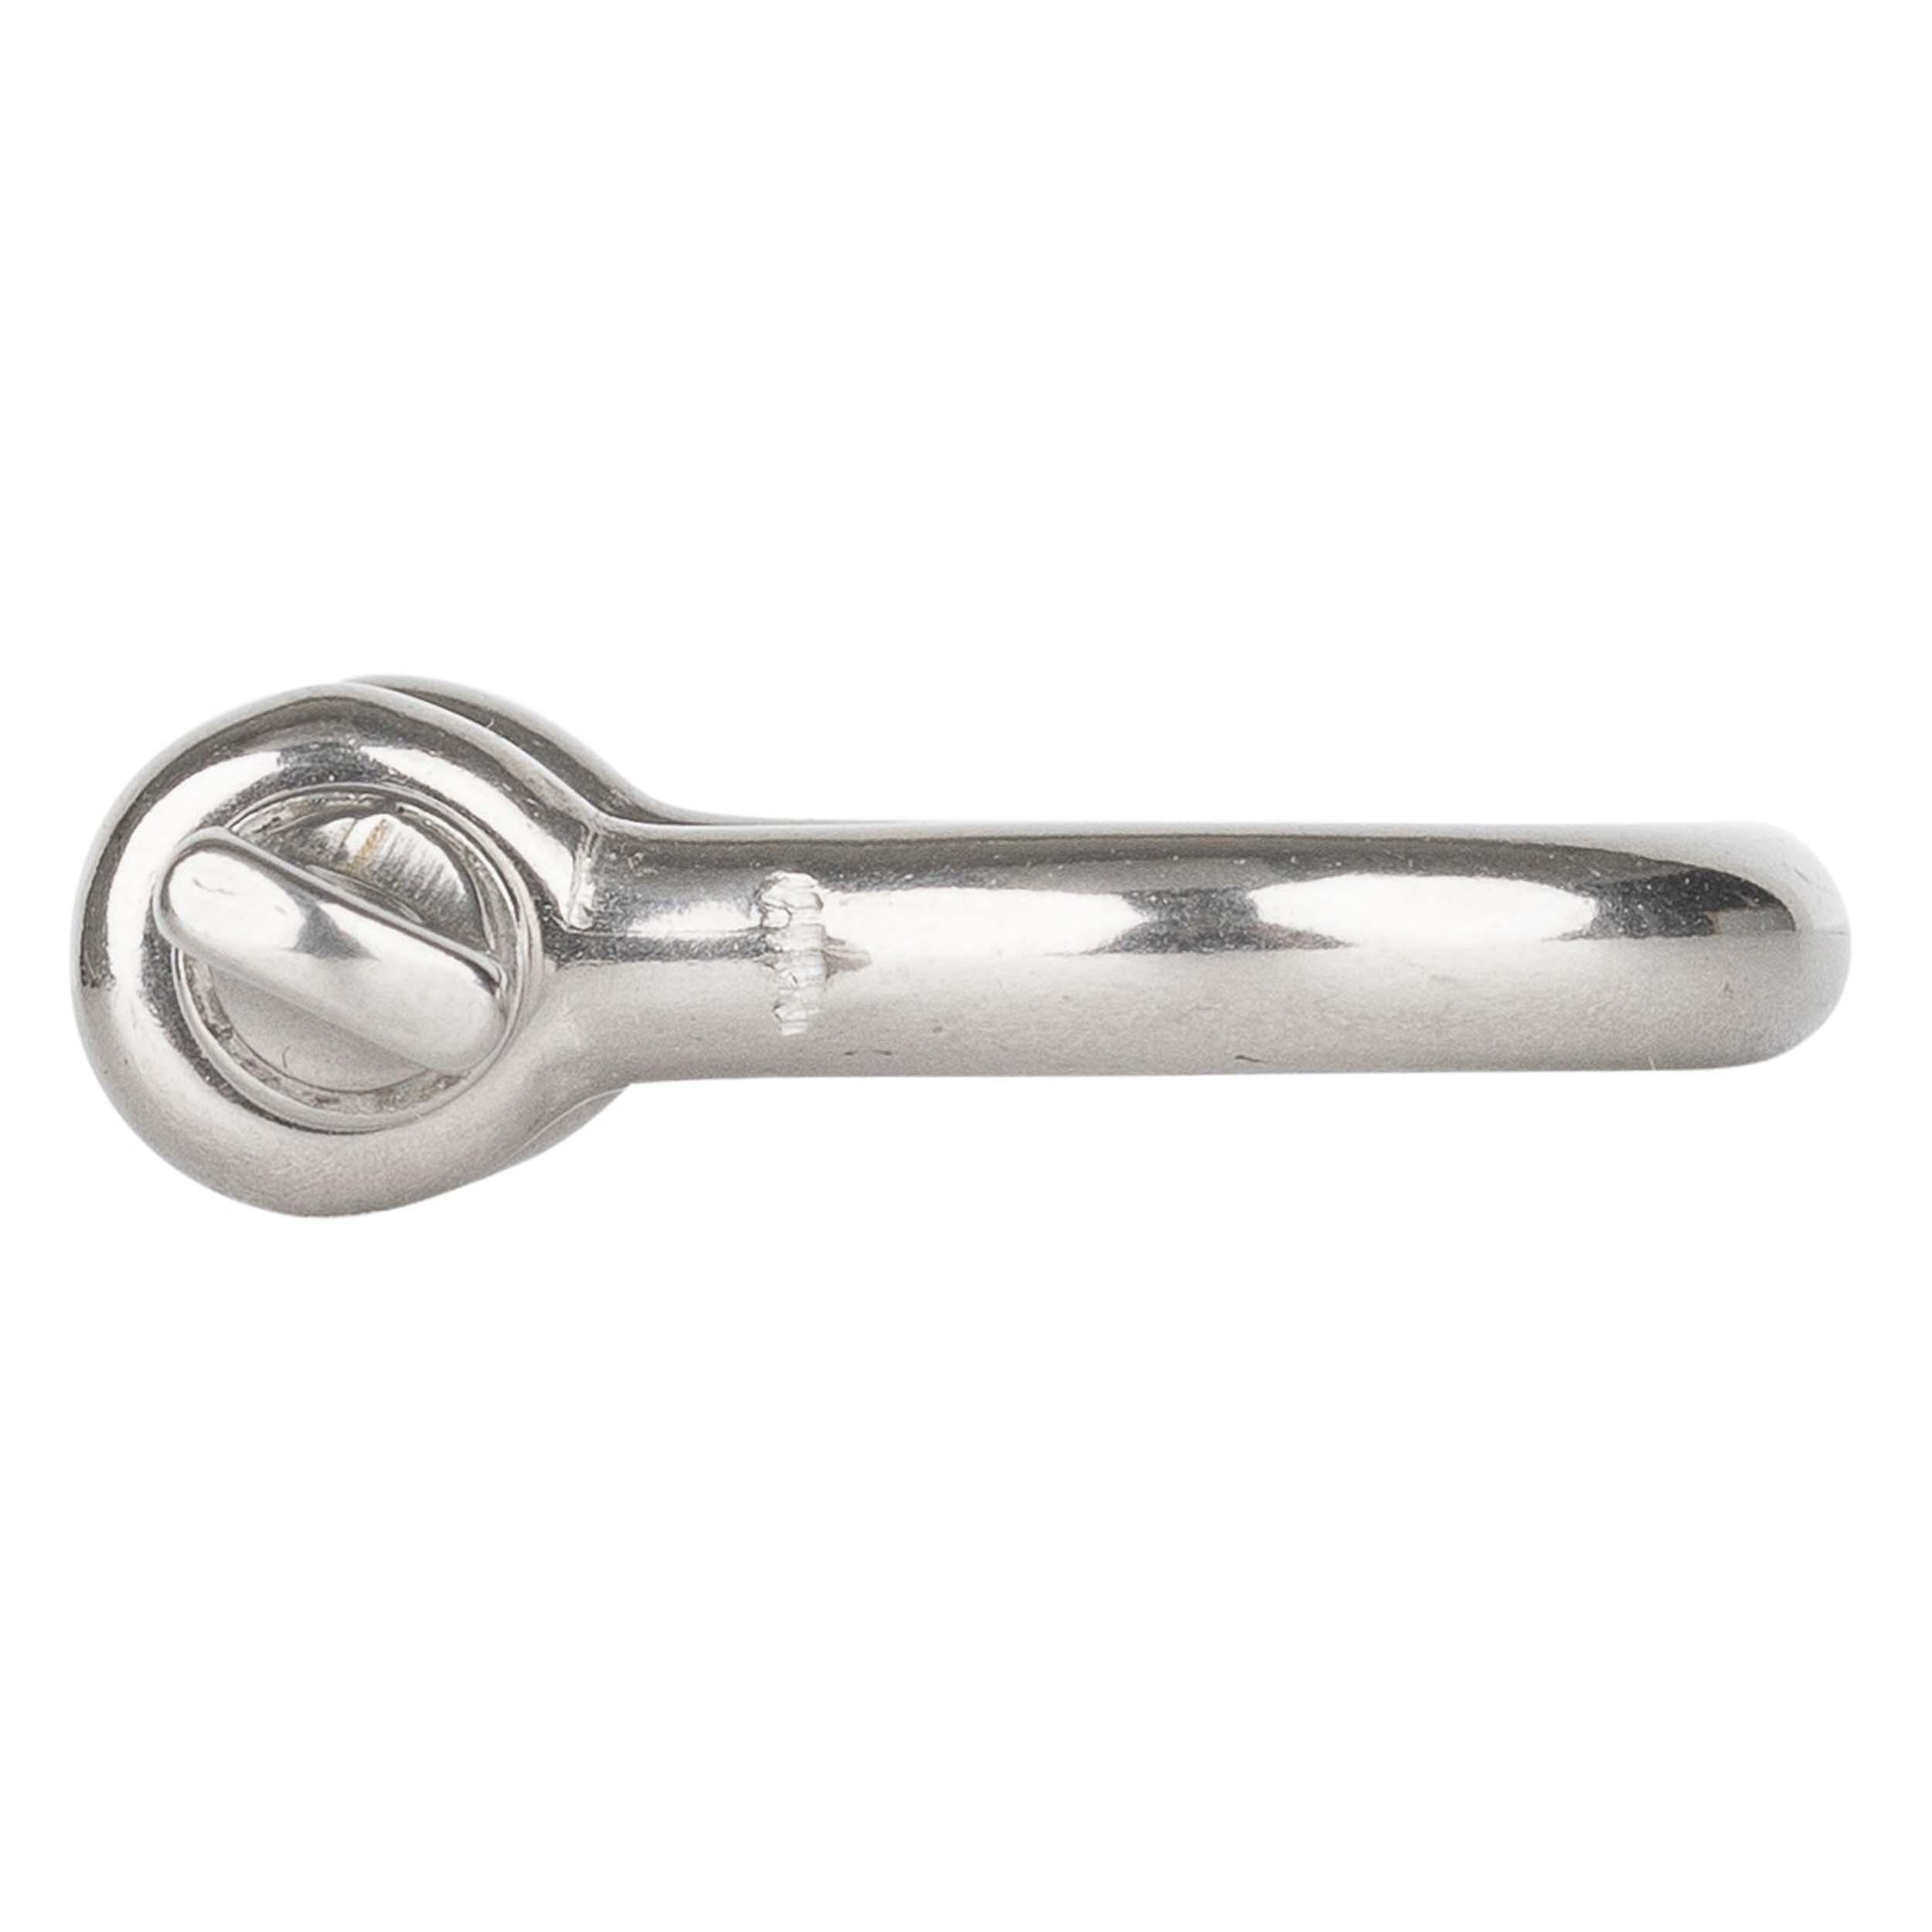 Sailing Stainless Steel Lyre Shackle 6 mm 3/4